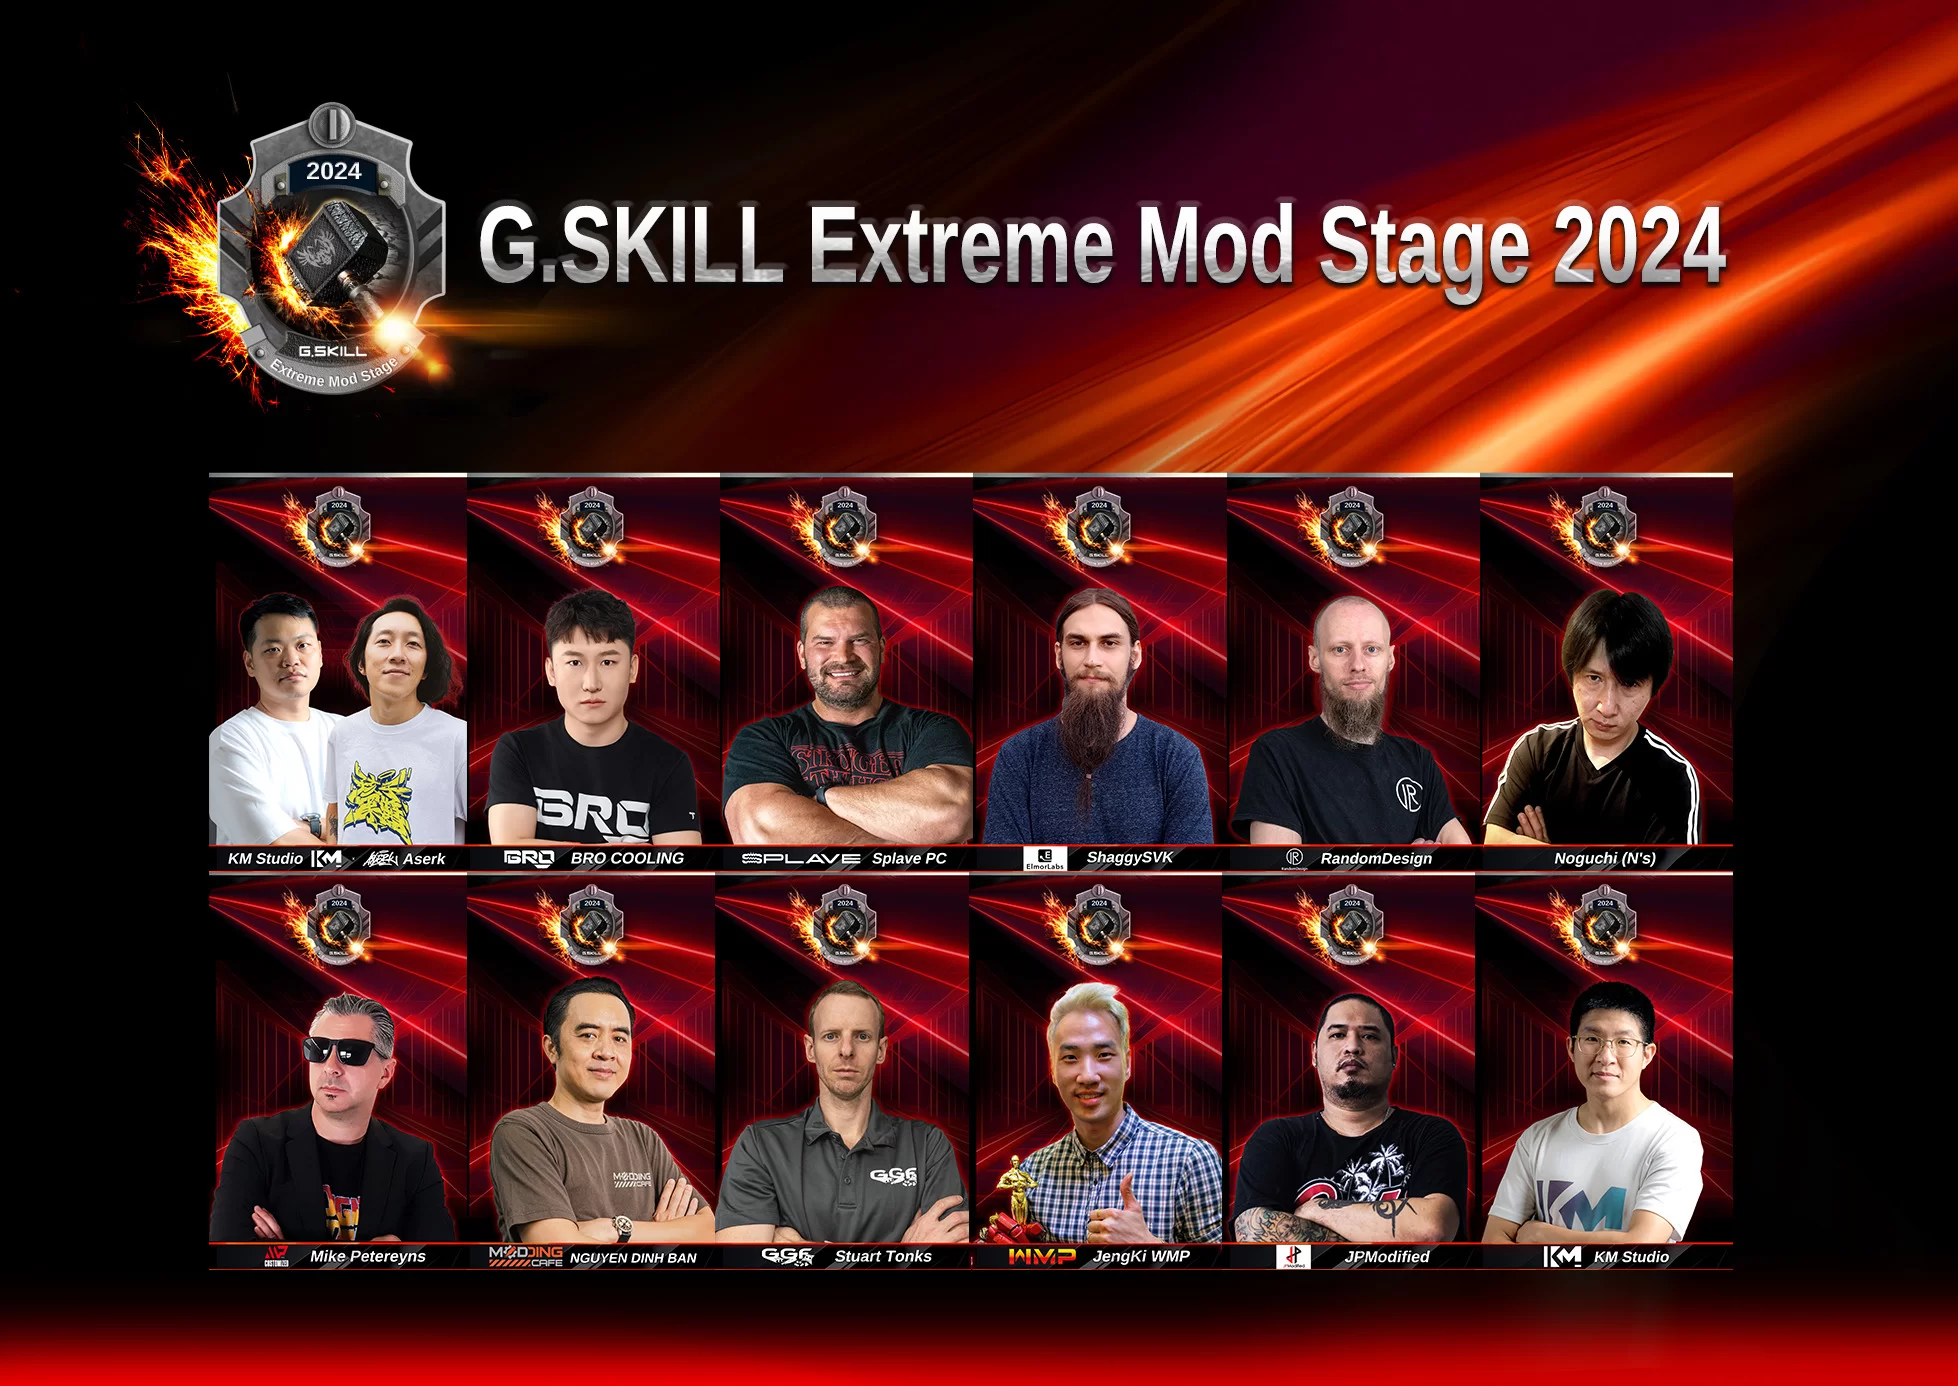 04 extreme mod stage 2024